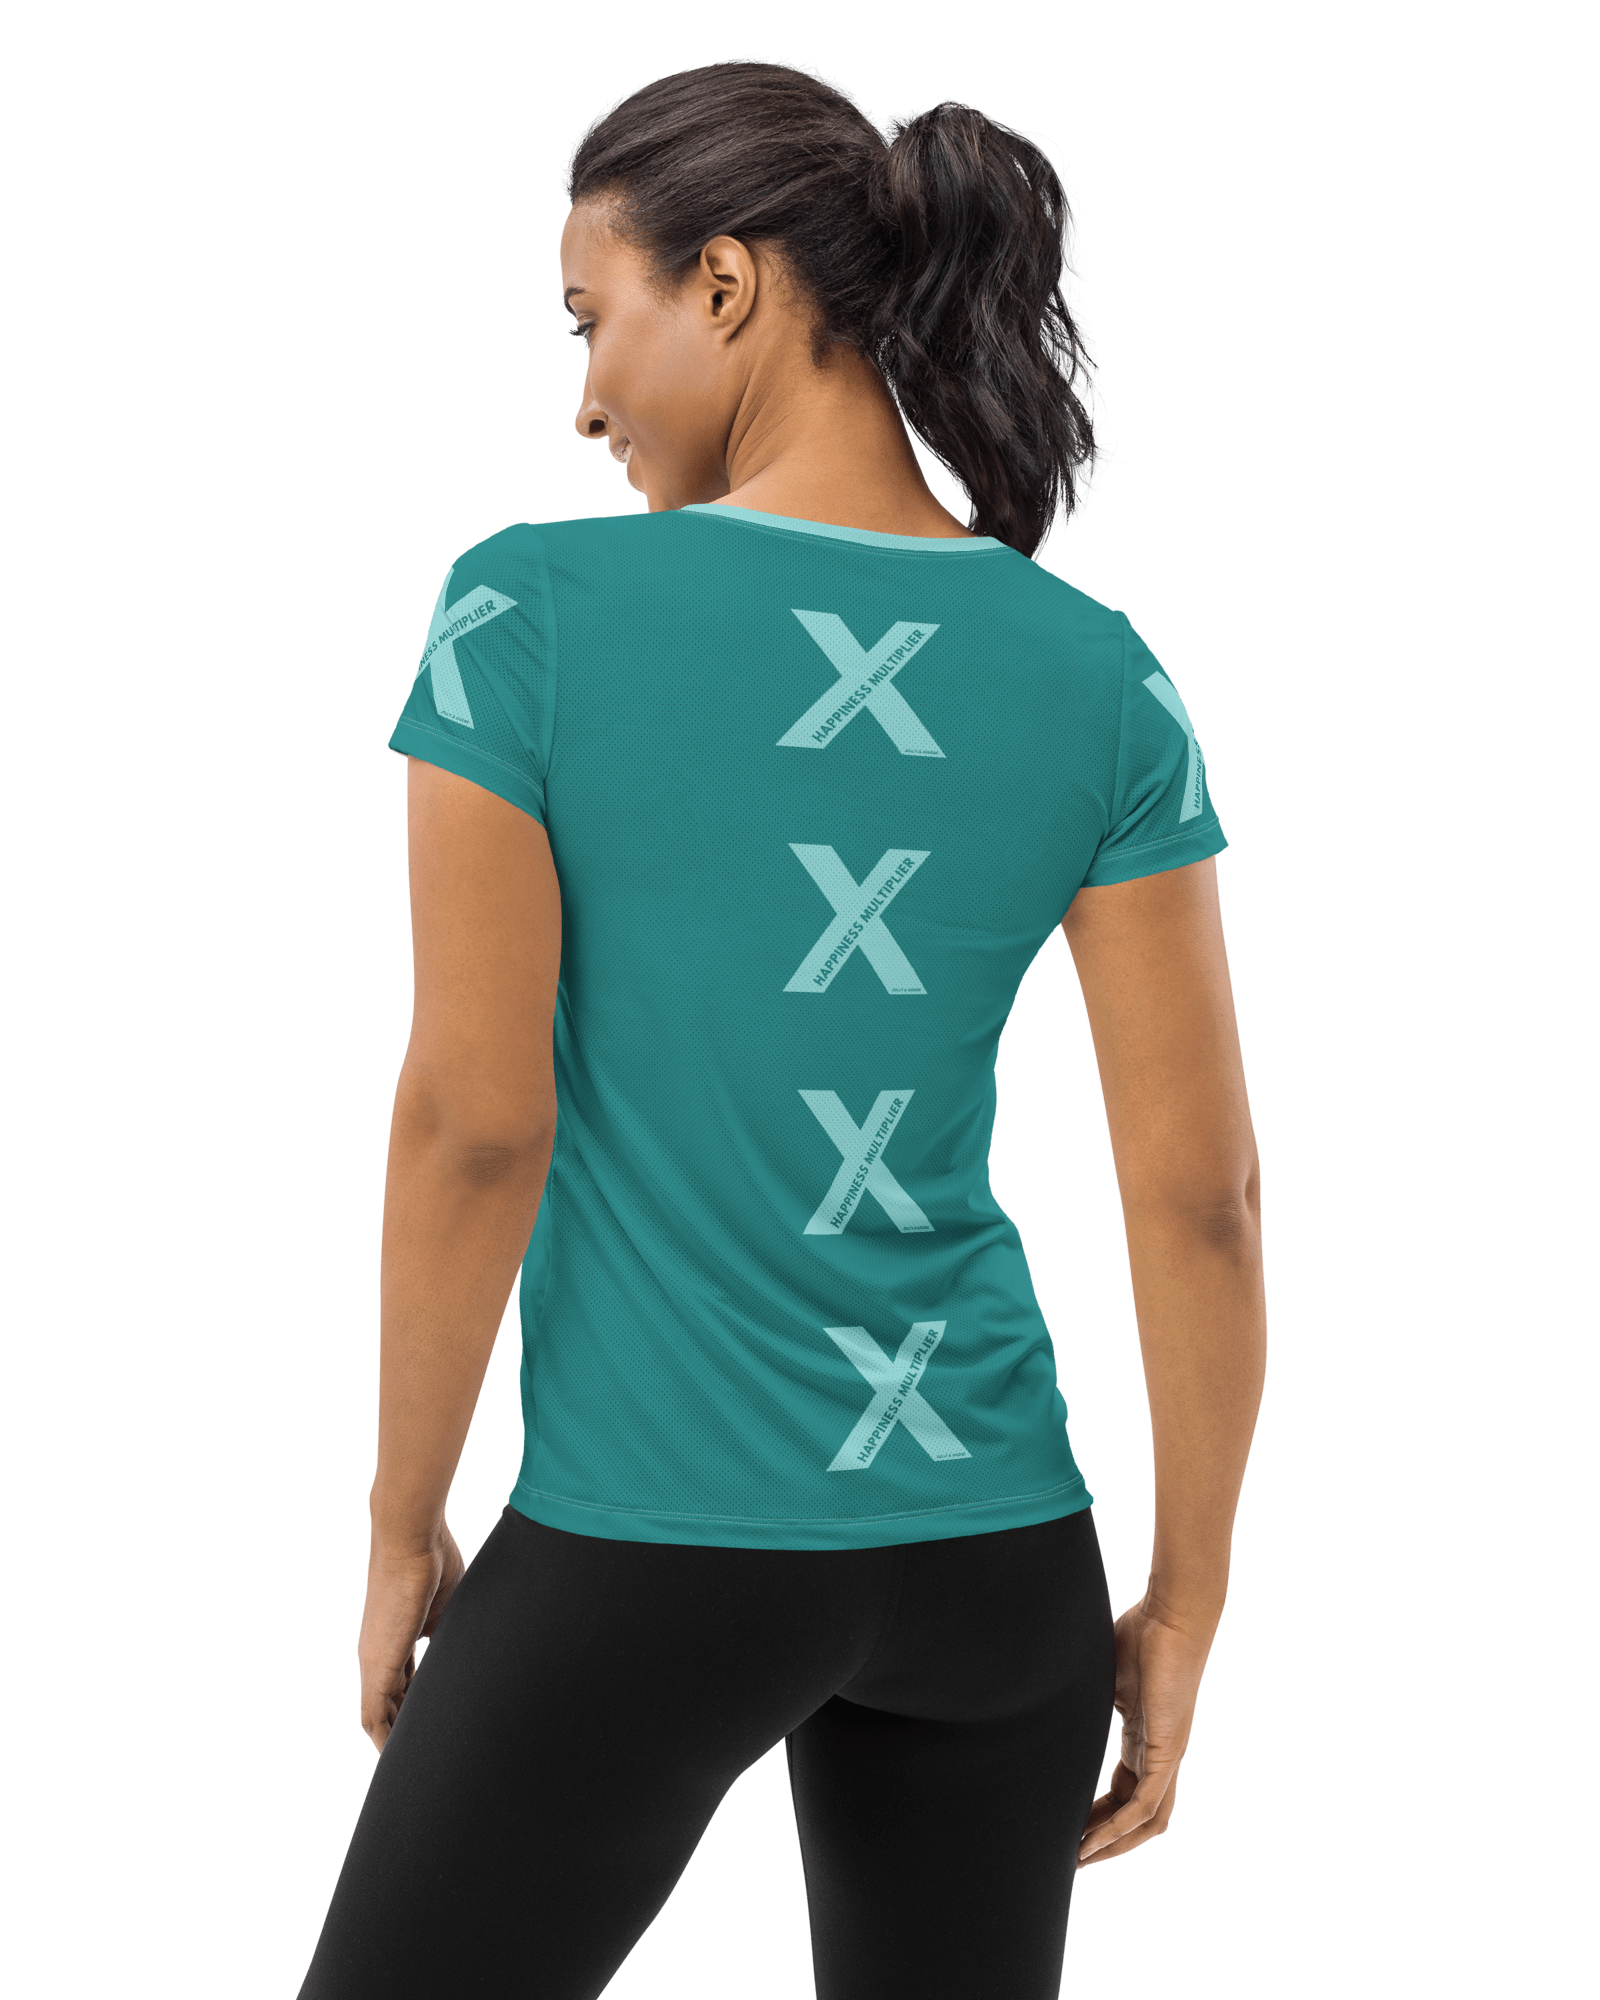 Happiness Multiplier Call to Arms Women's Athletic Shirt in Cool Activewear Jolly & Goode